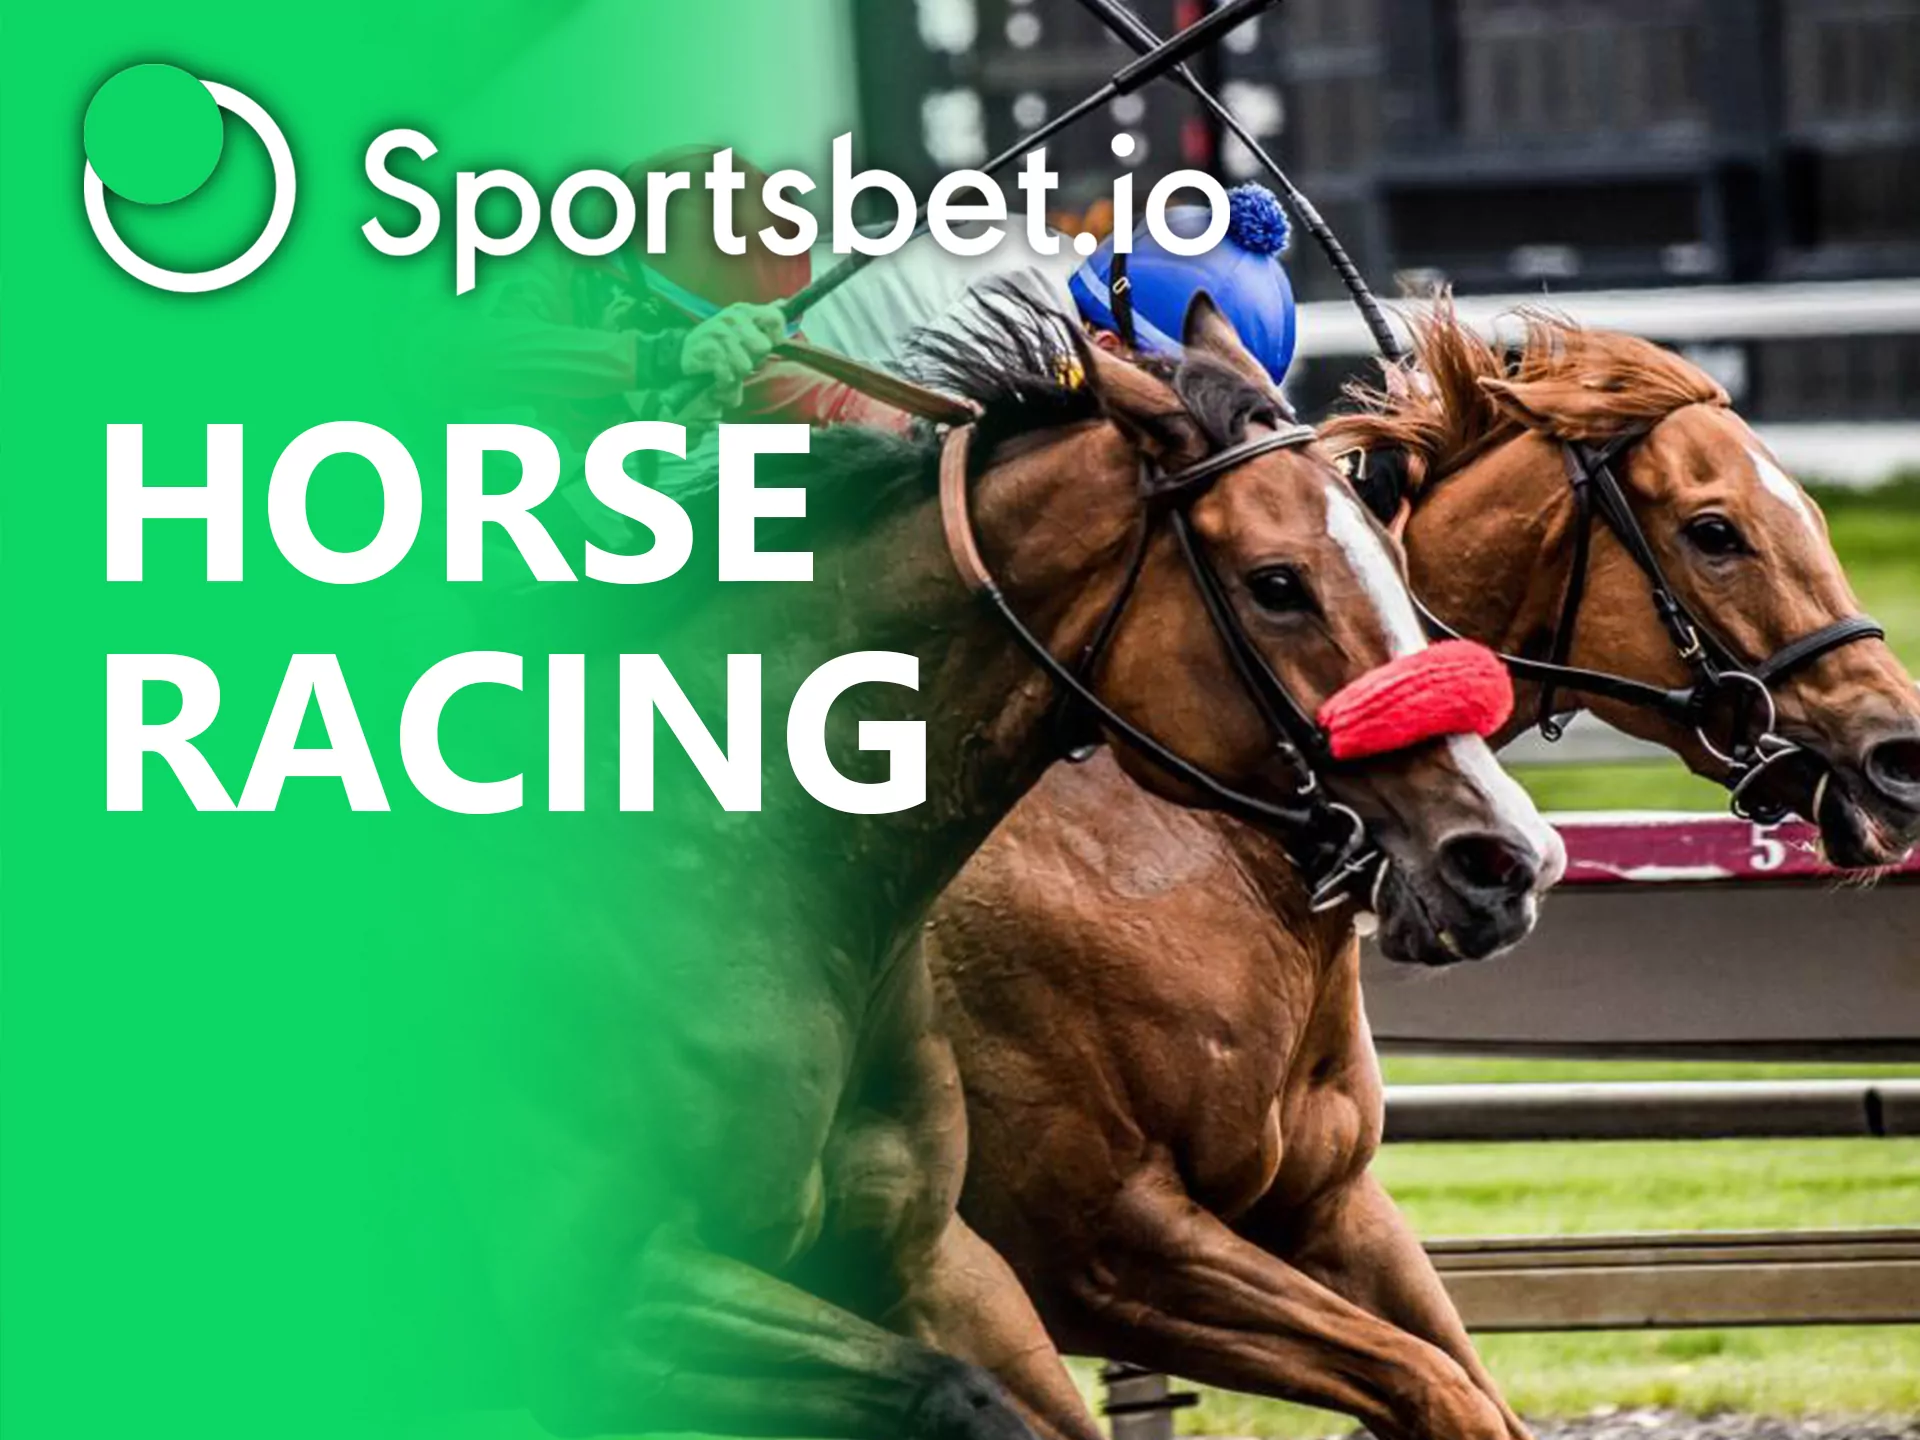 You can bet on horse racing ar Sportsbet.